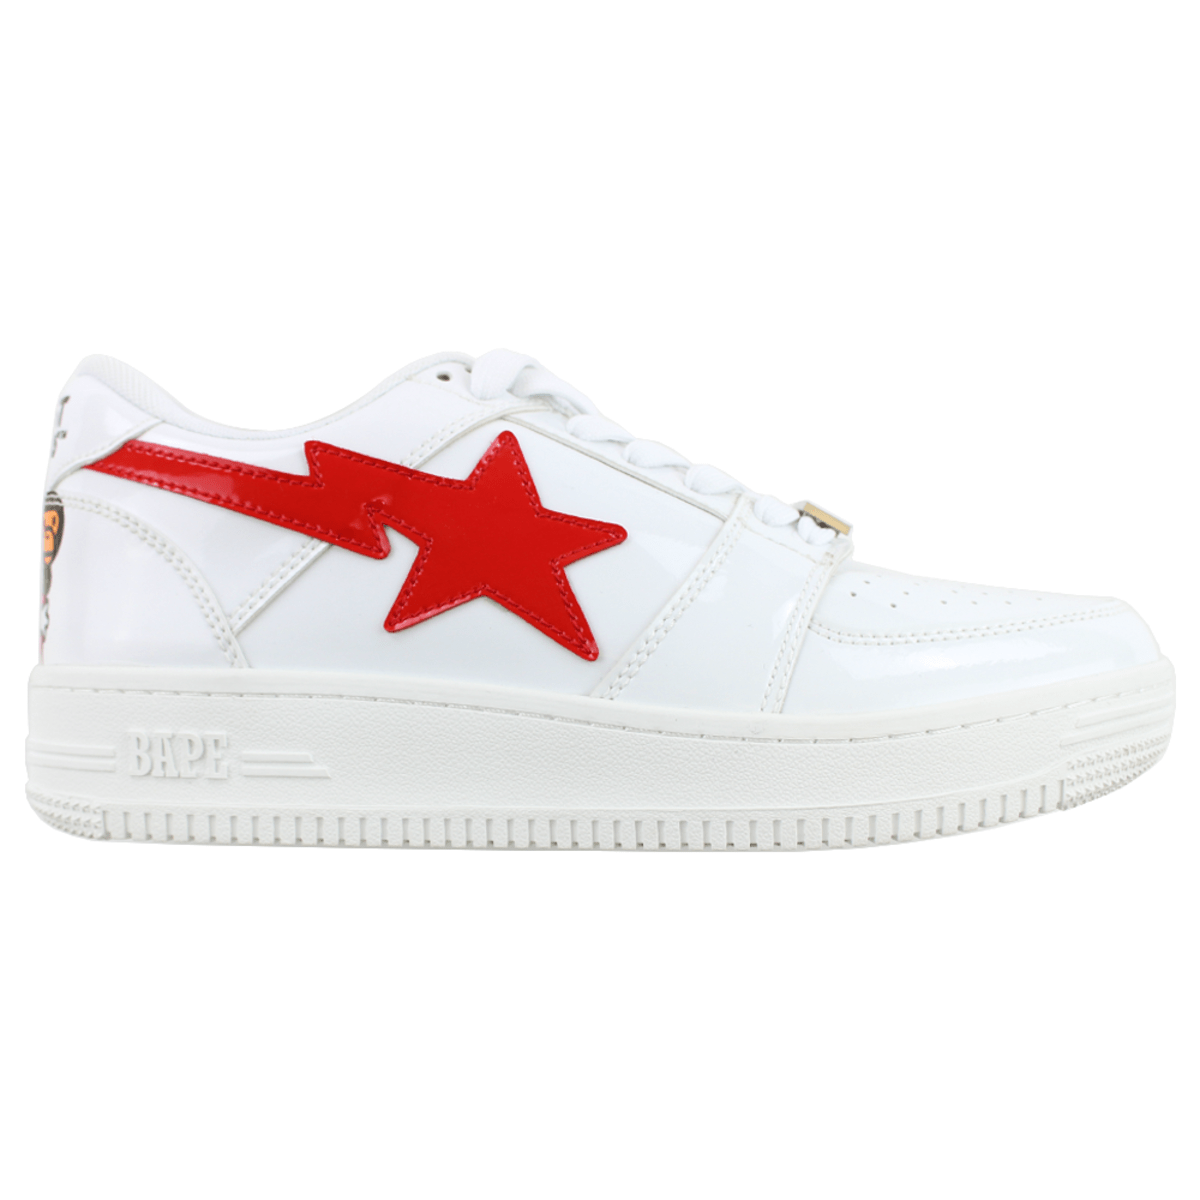 Bapesta x Ghostbusters Milo White Red - SaruGeneral